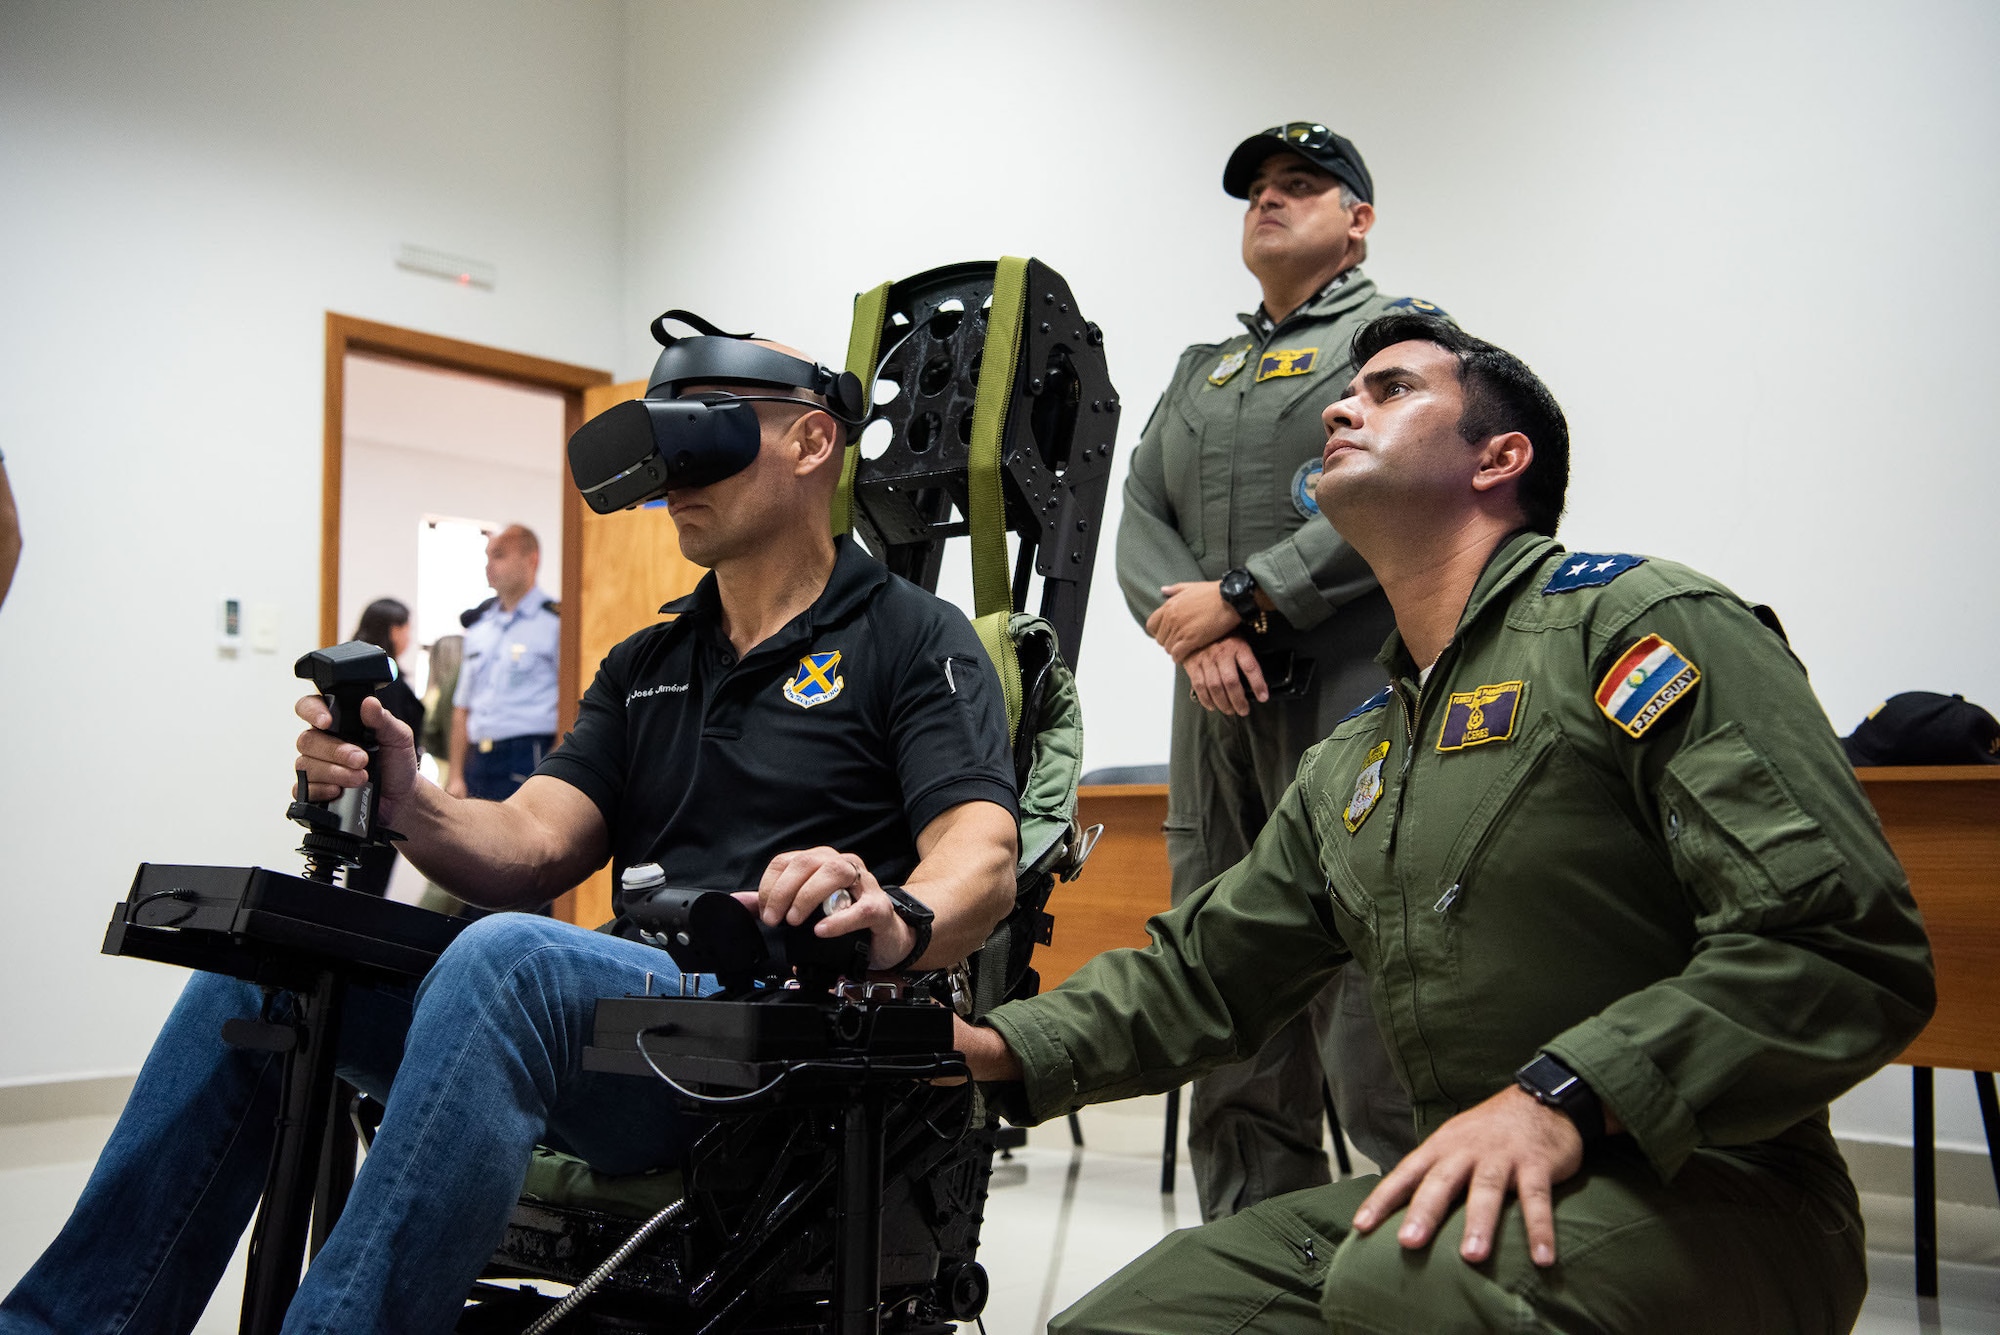 Two men sitting down looking up. Man on left is using virtual reality equipment while man on right is guiding him.